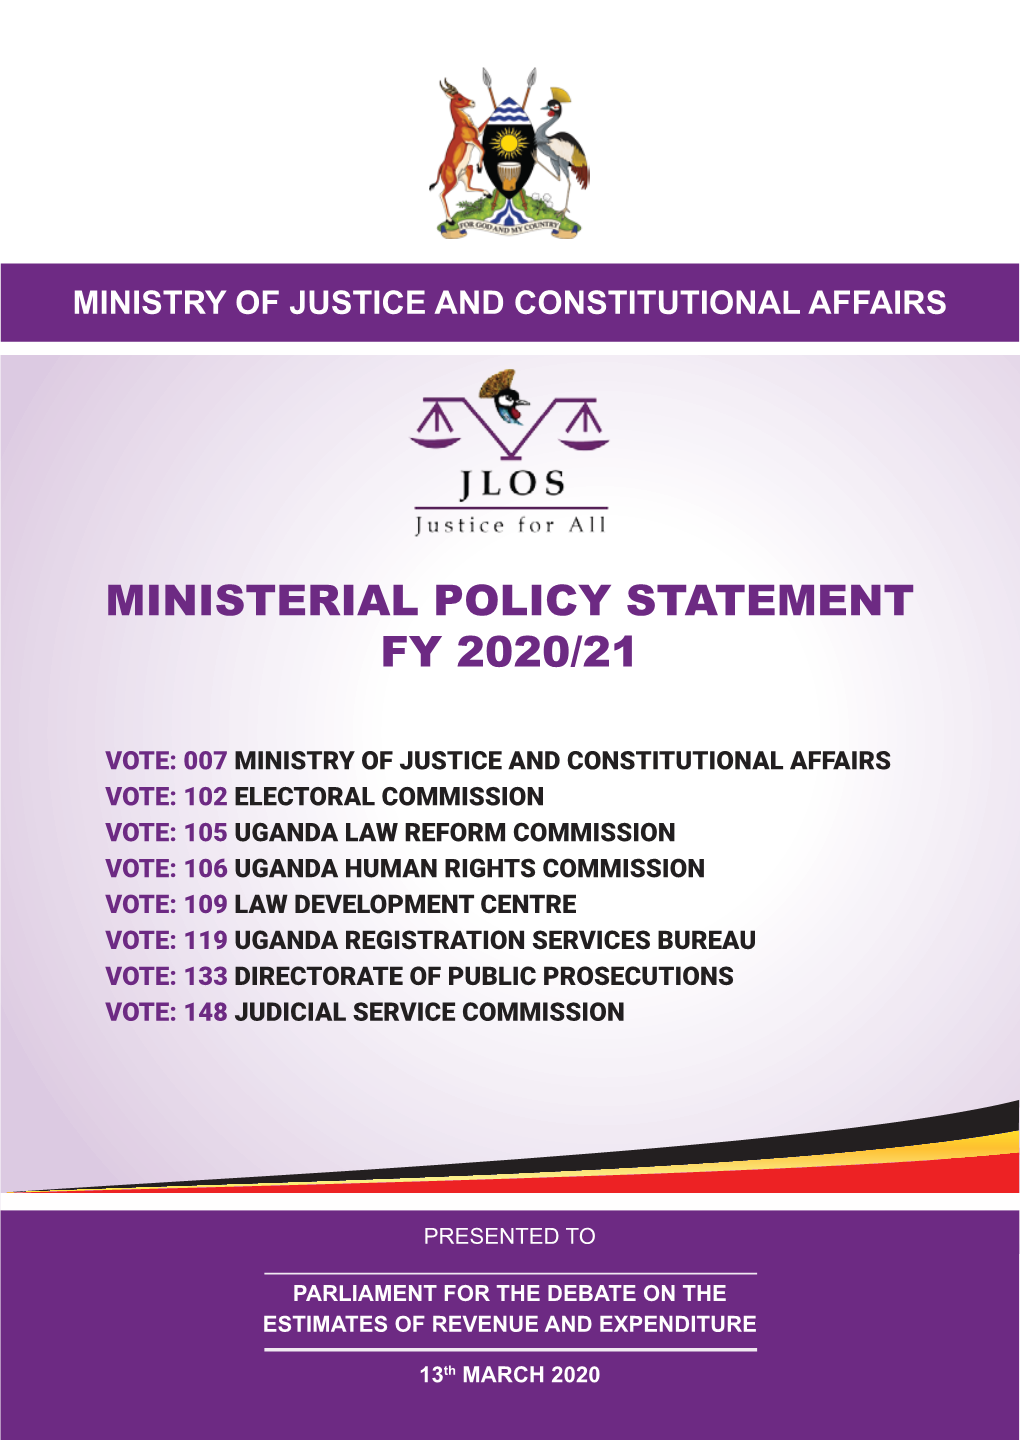 Ministerial Policy Statement Fy 2020/21